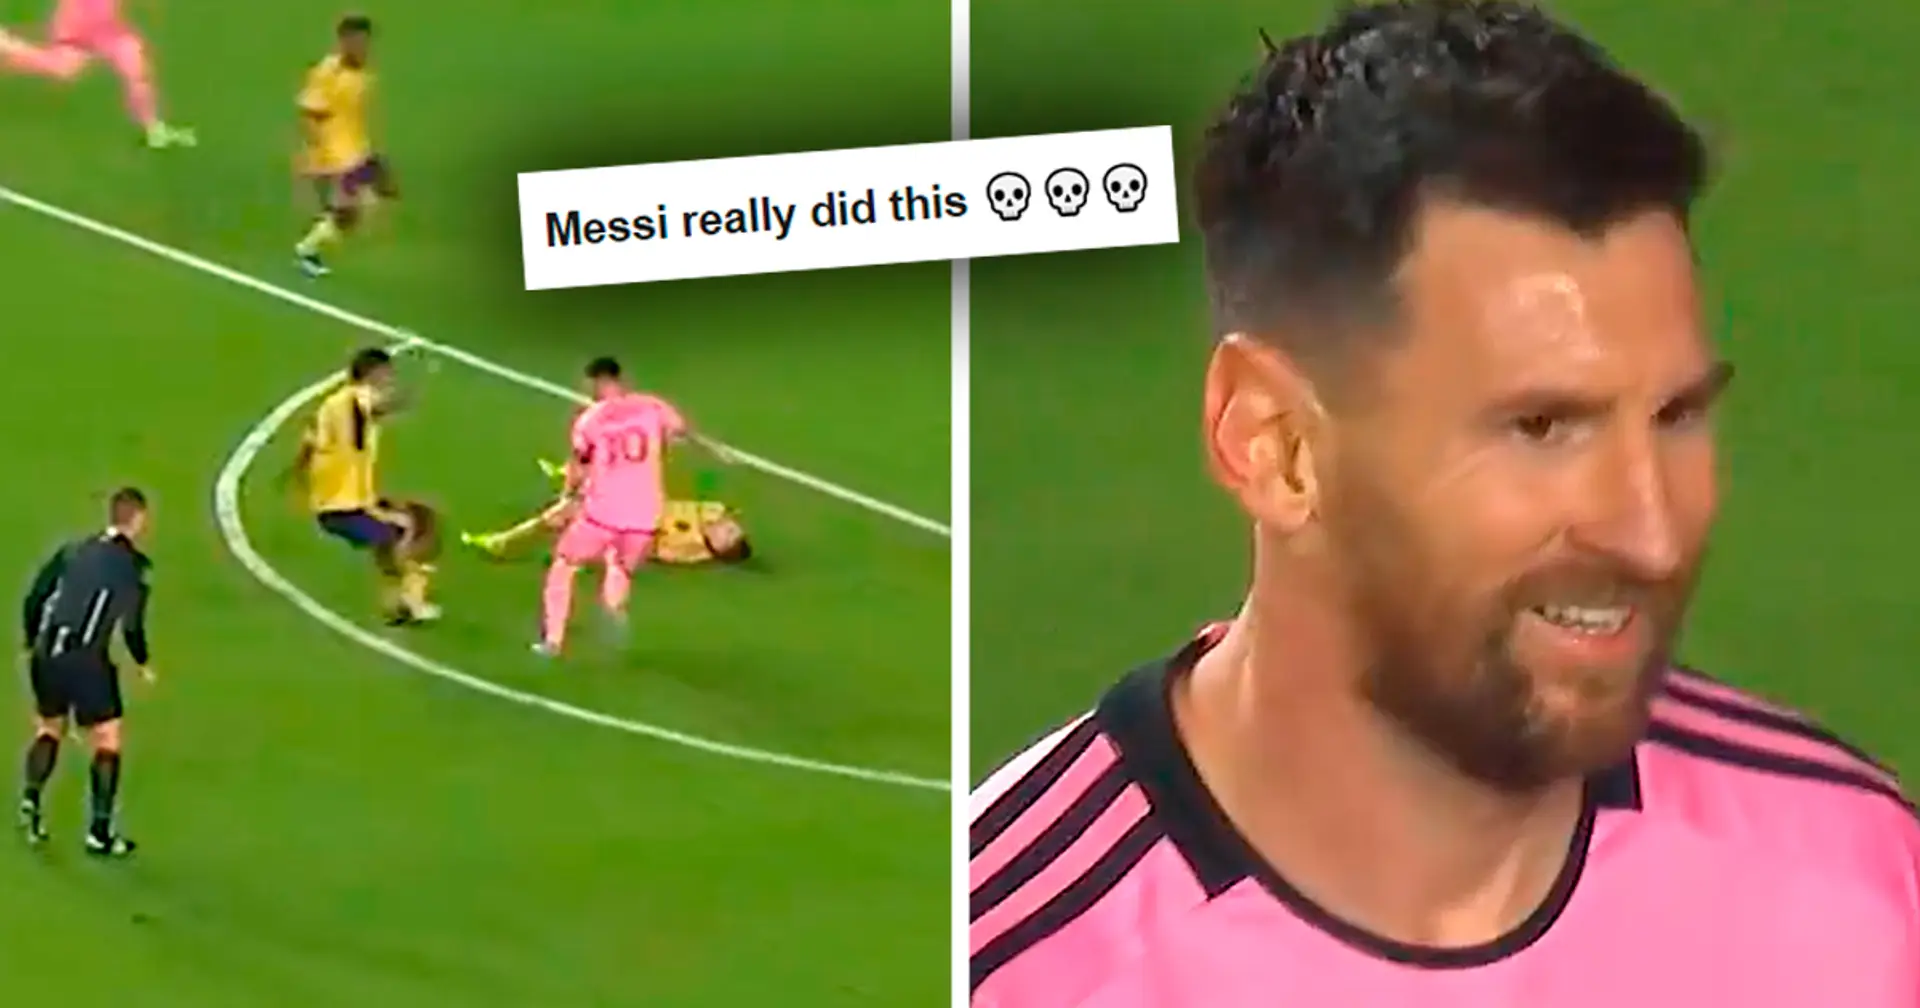 Spotted: Messi chips a player who is down injured – video goes viral 